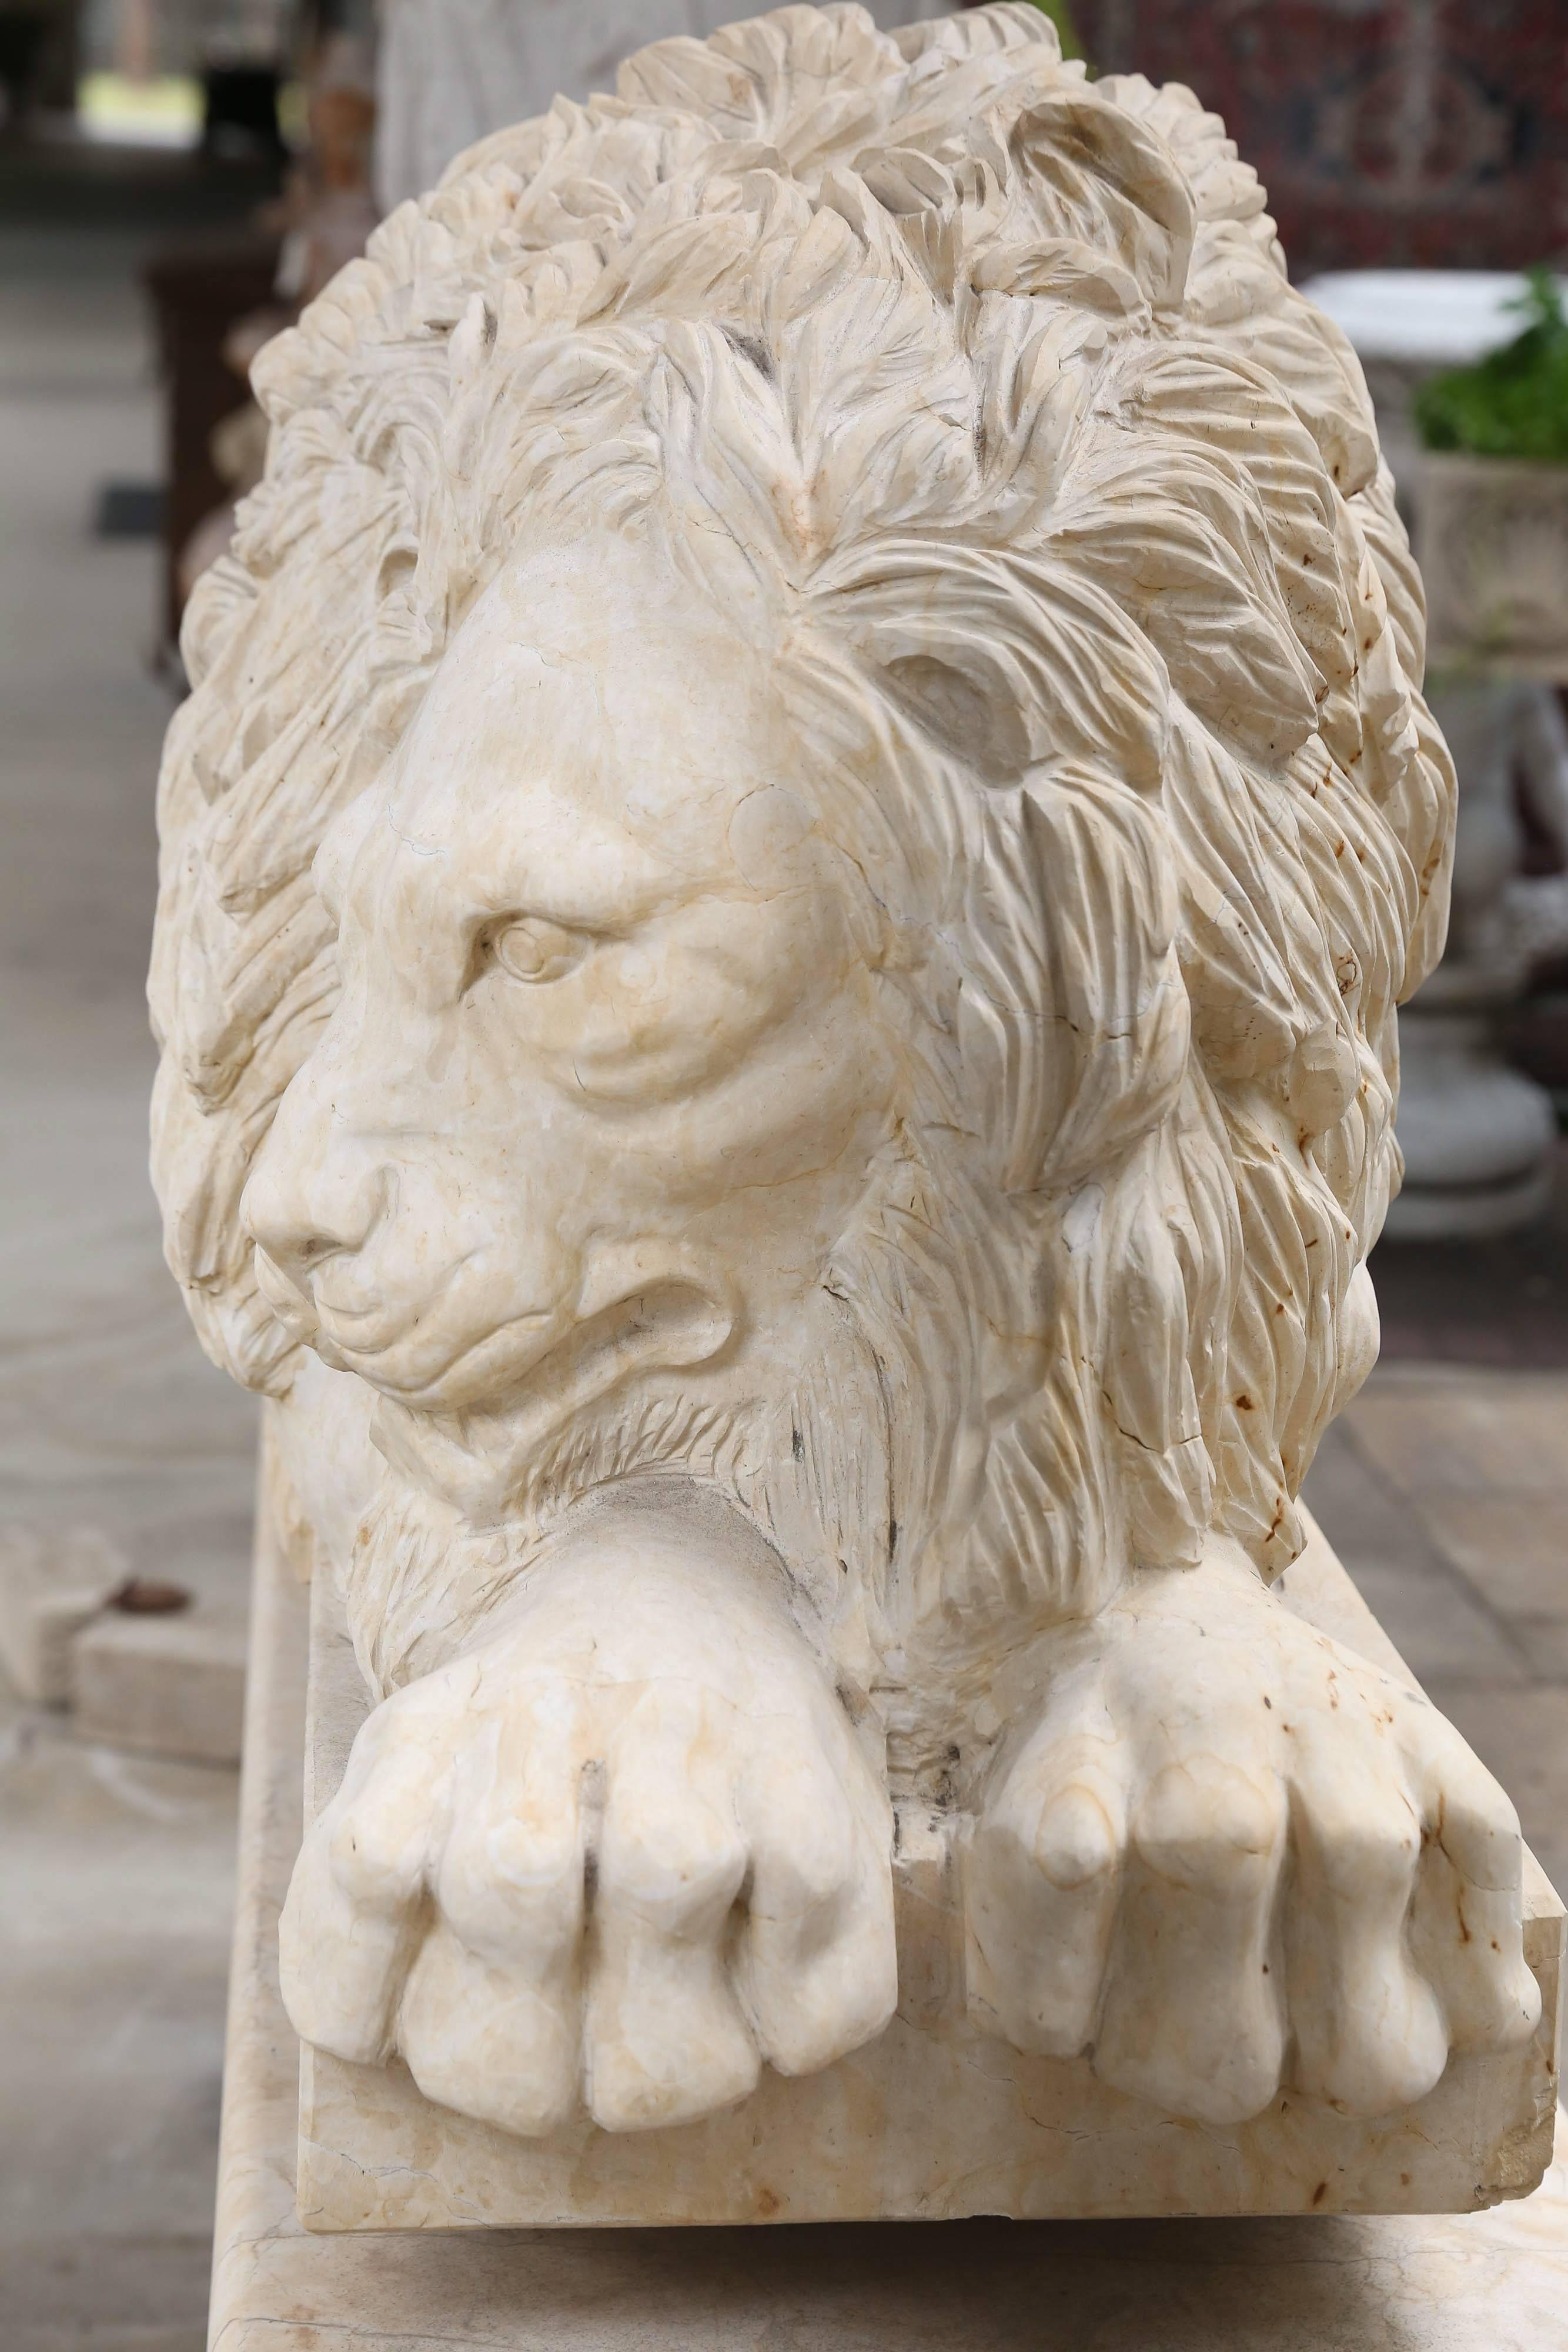 20th Century Pair of Large and Impressive Carved Marble Lion Garden Statues on Pedestals